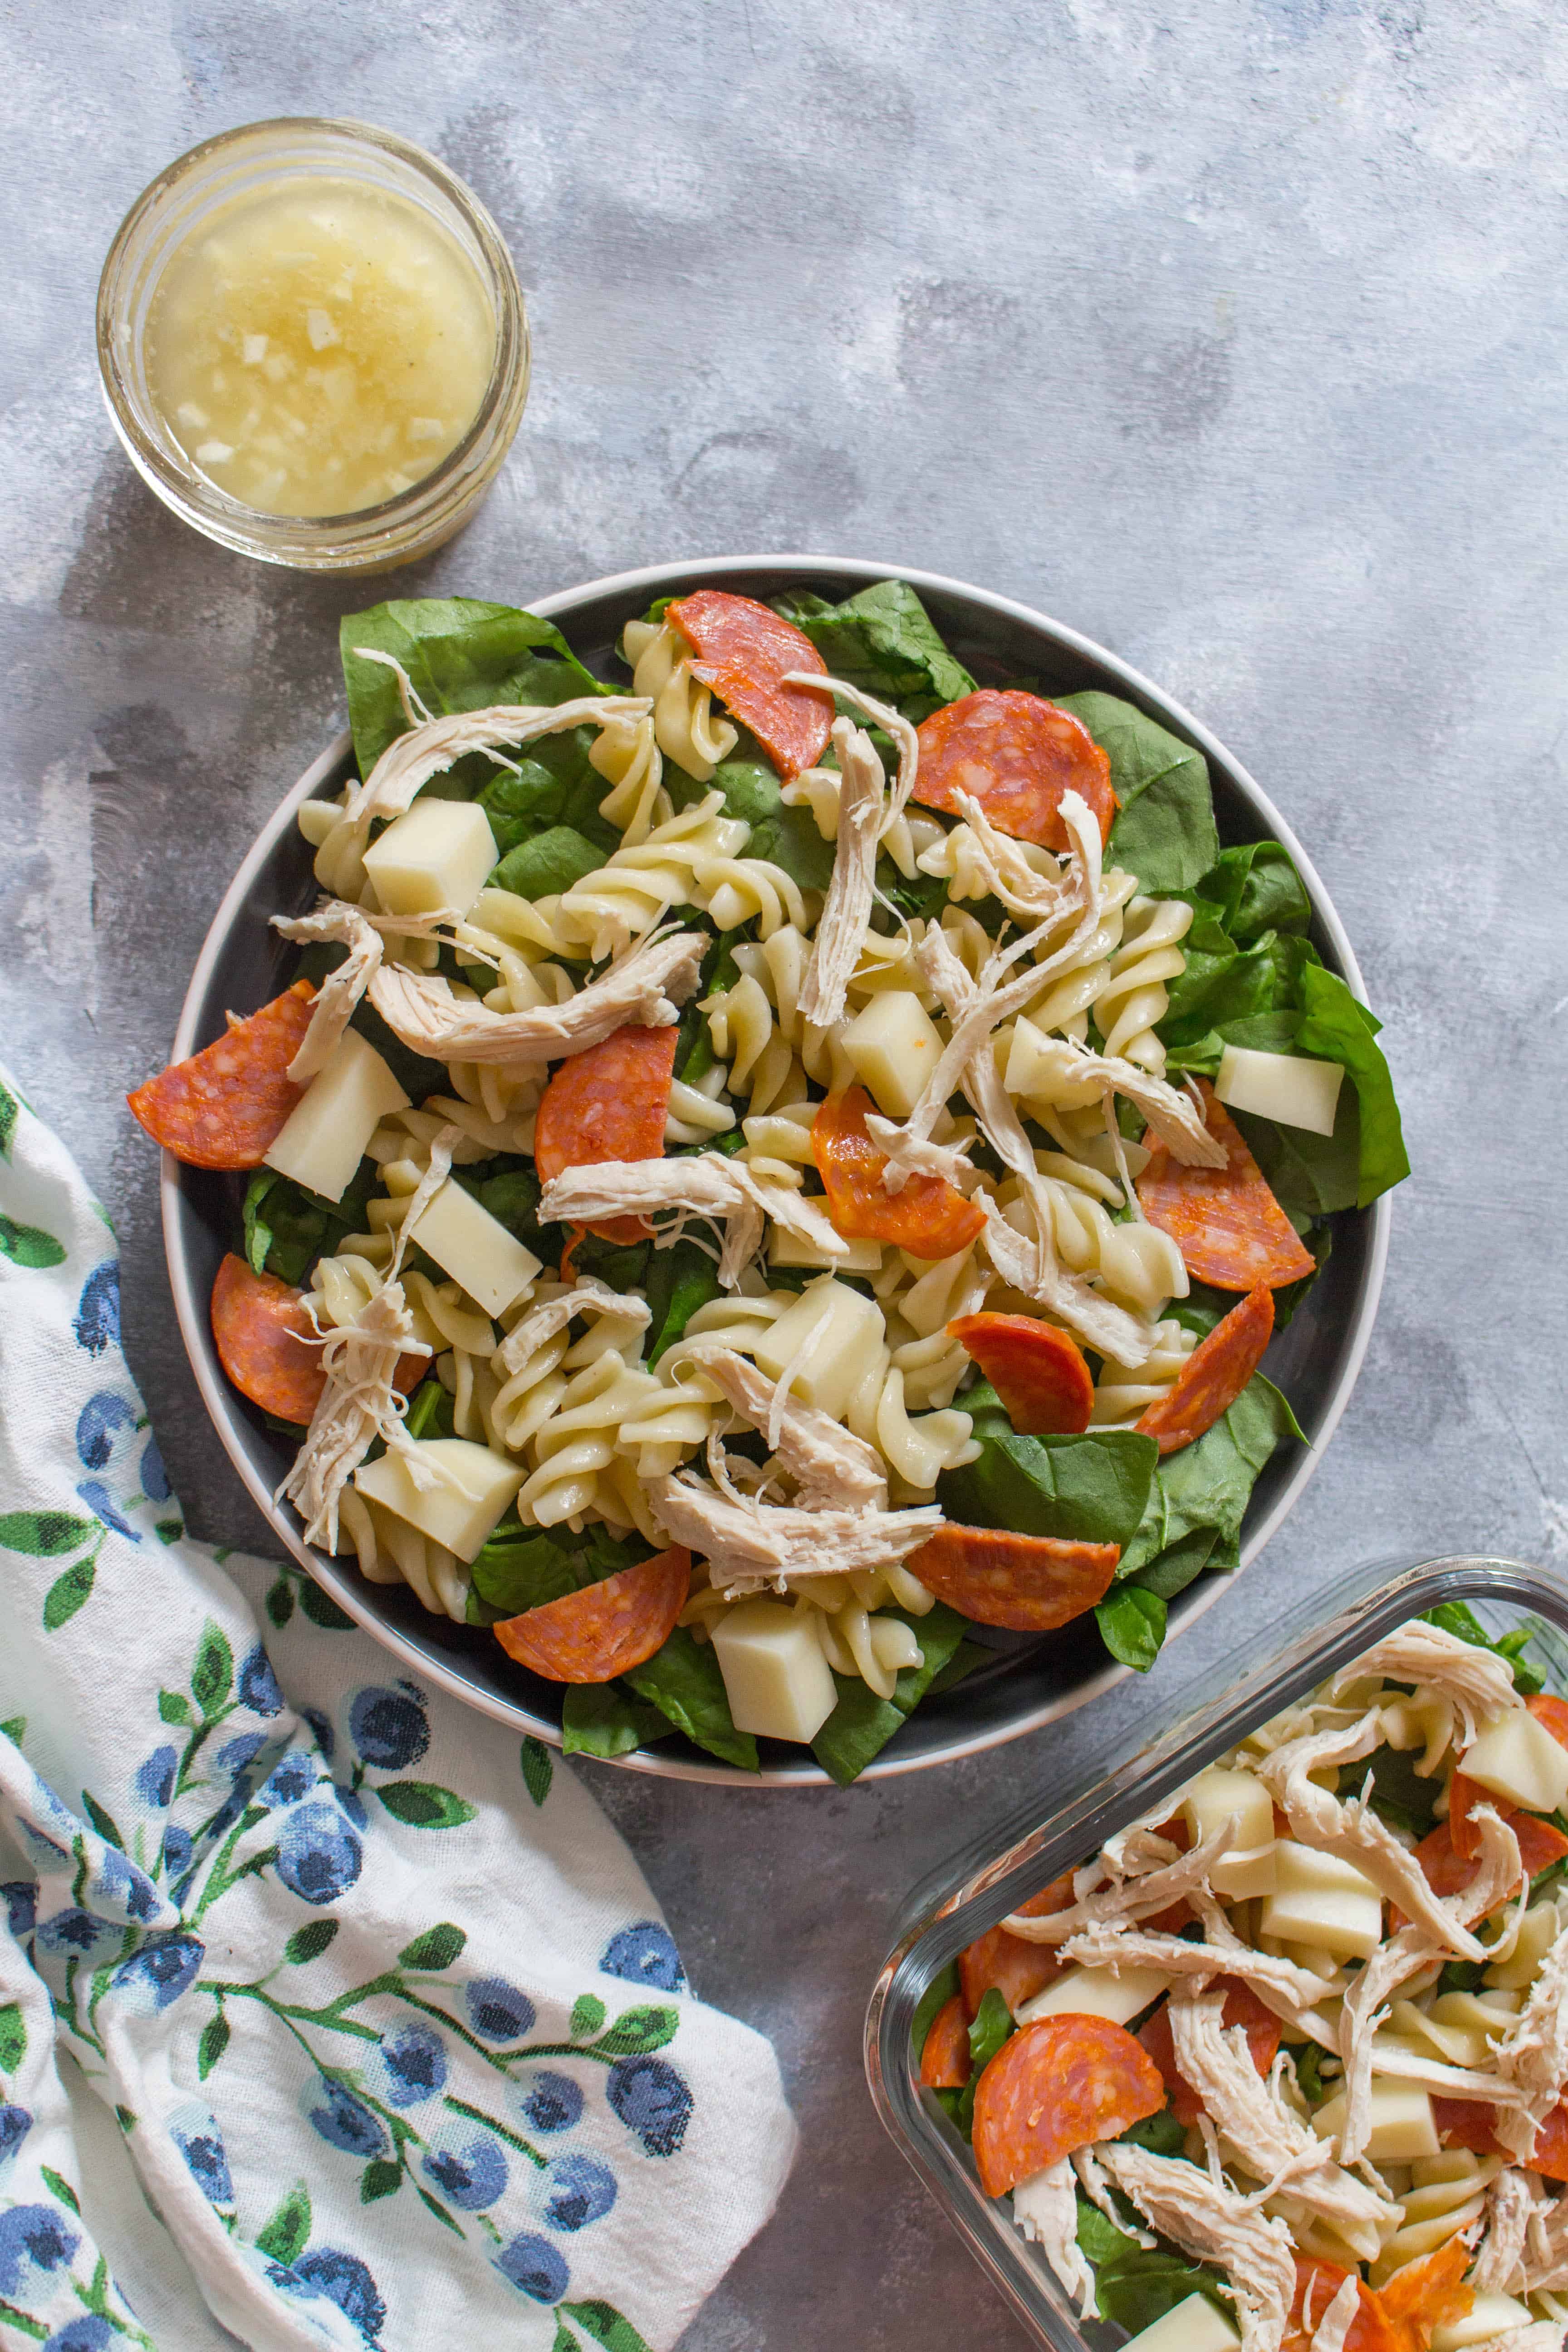 Perfect for hot summer days, this easy chicken pepperoni pasta salad is just what you need! Plus, this pasta salad is great for meal preps if you have don't have access to a microwave.